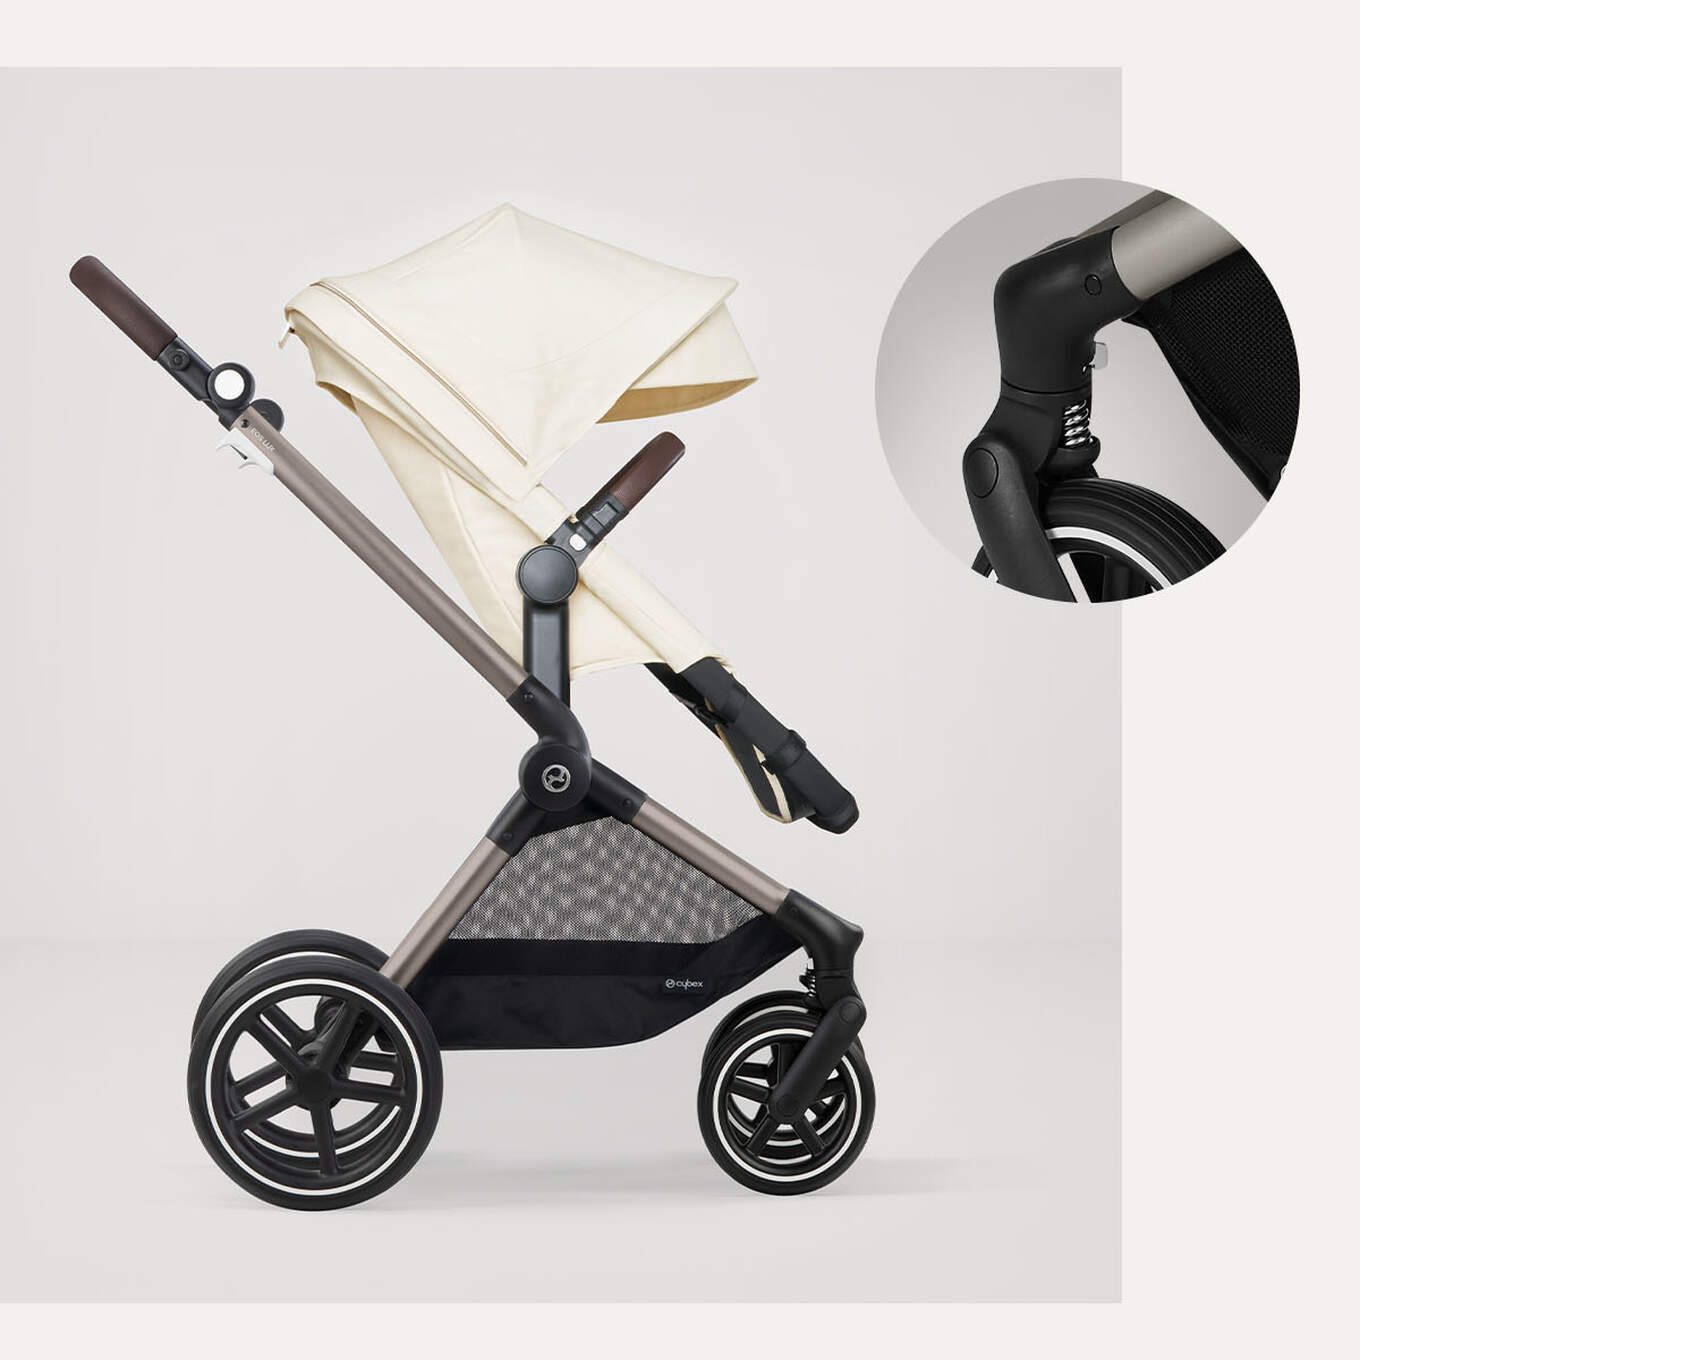 CYBEX EOS Lux ׀ The 2-in-1 Stroller